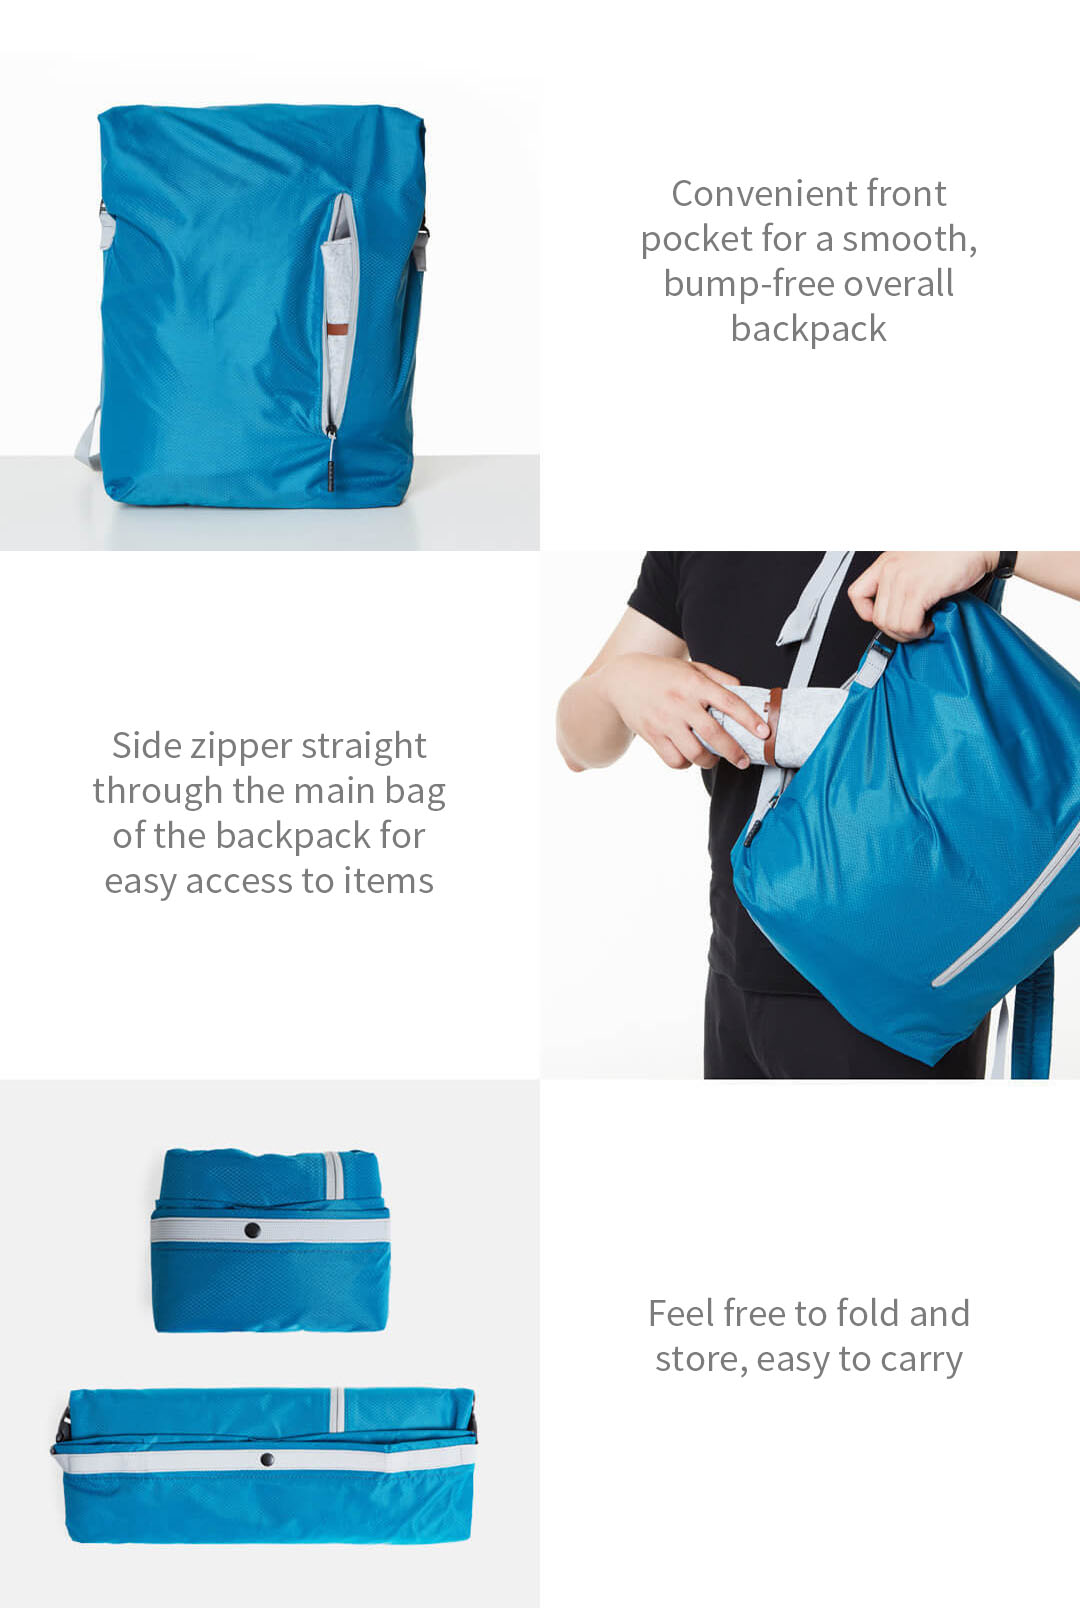 Outdoor-Backpack-Lightweight-Sports-Folding-Bag-Portable-Camping-Hiking-School-Bag-from-XIAOMI-YOUPI-1504212-5